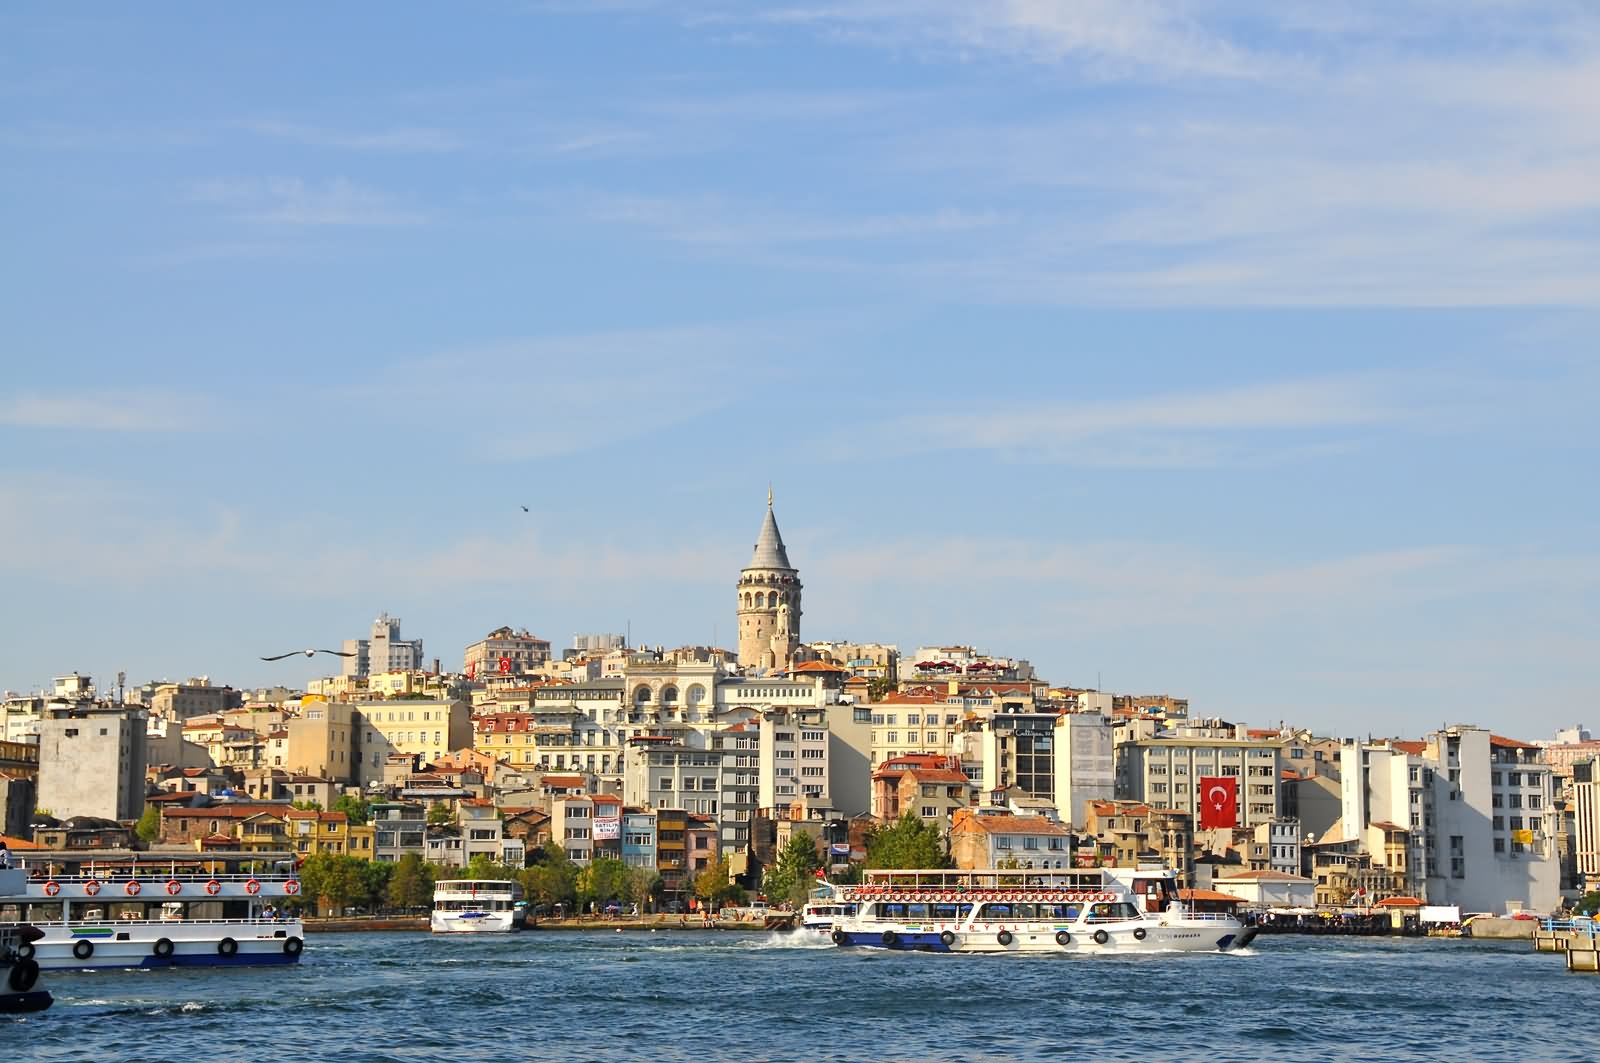 The Galata Tower And Surrounding Buildings View Across The Bosphorus River